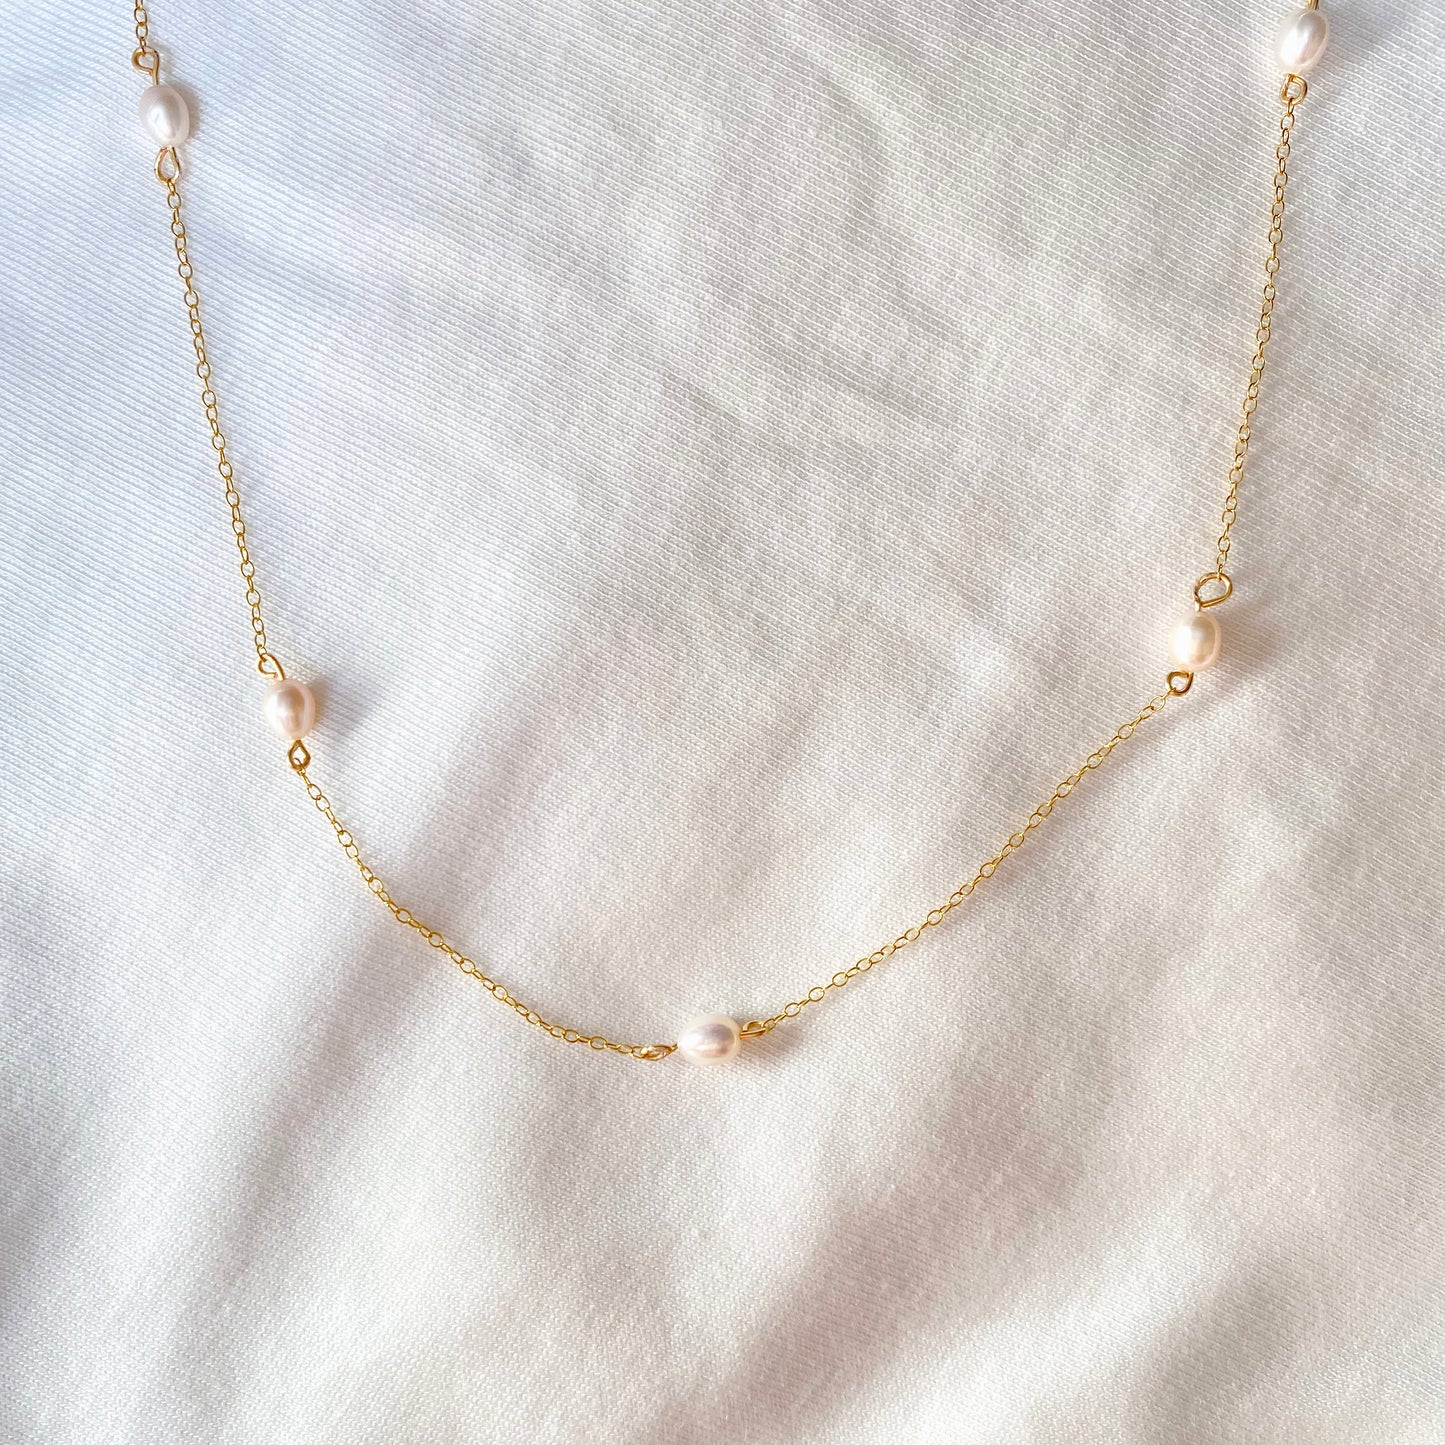 5 Pearl Necklace in Gold